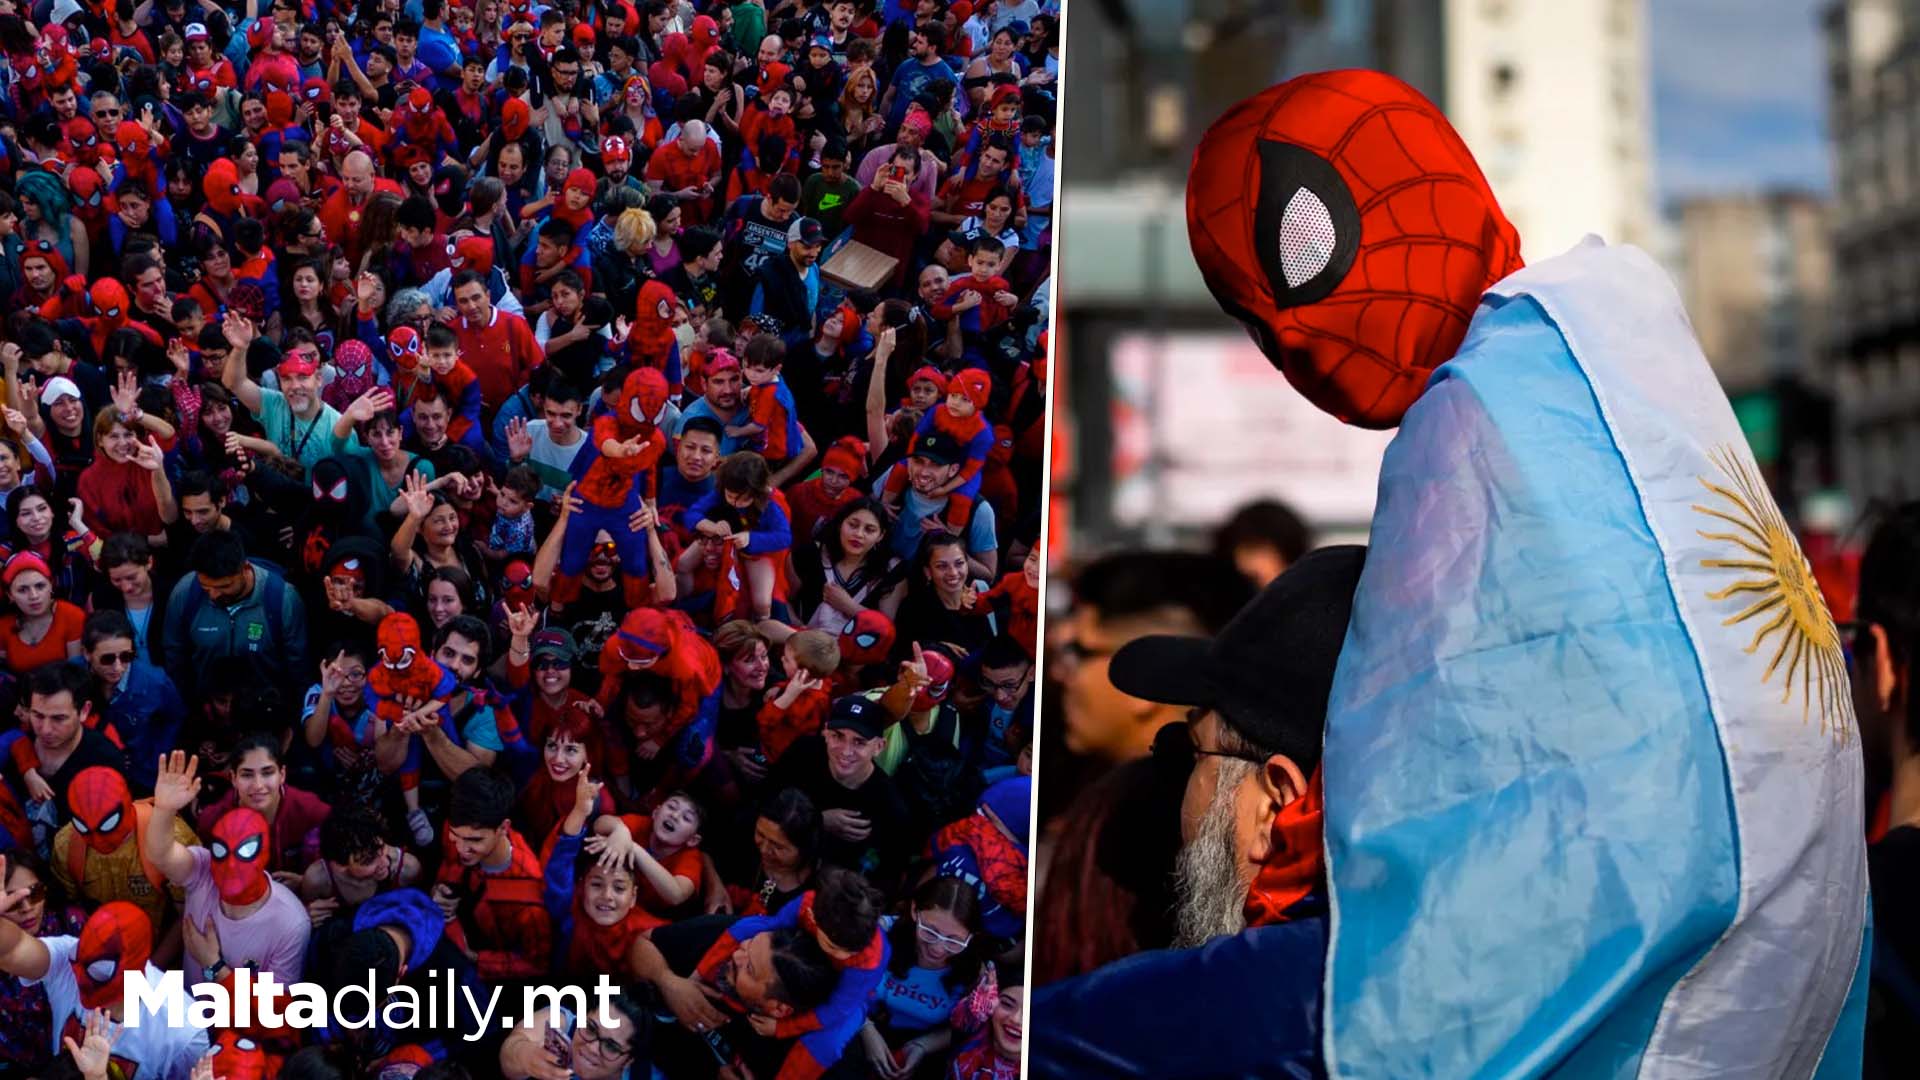 Over 2,000 In Spider-Man Costumes In Argentina For World Record